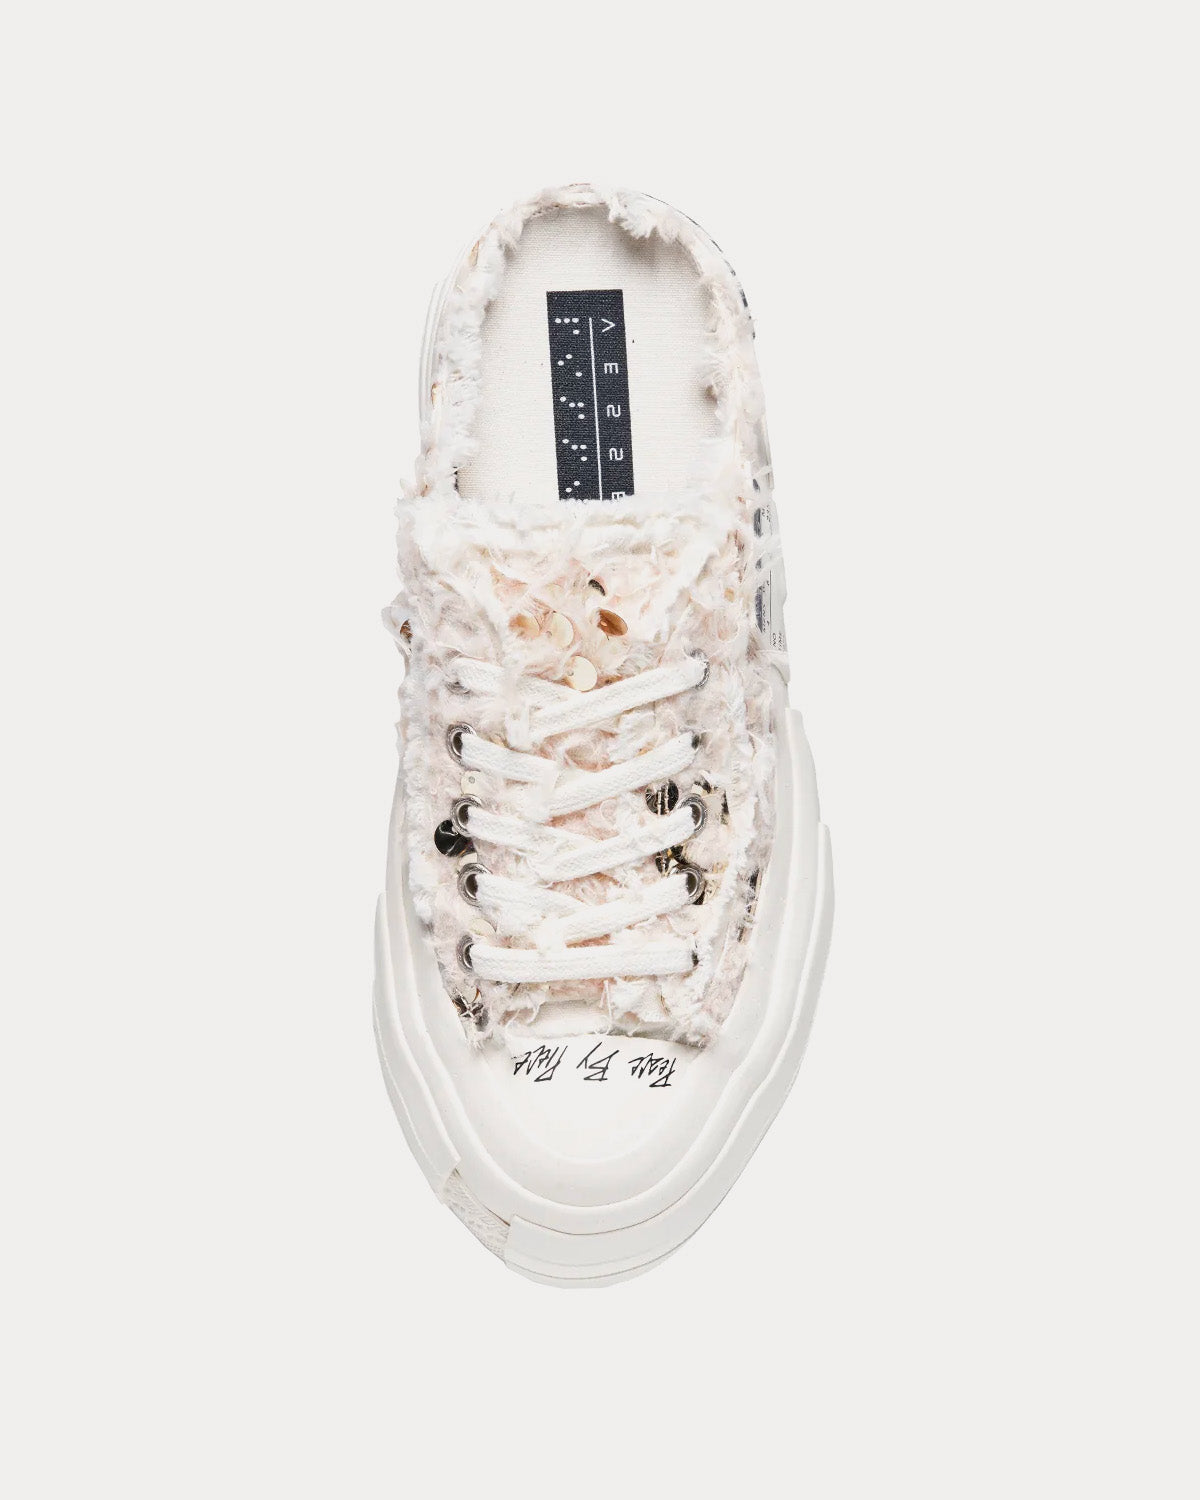 xVESSEL - G.O.P. White / Gold Slip On Sneakers